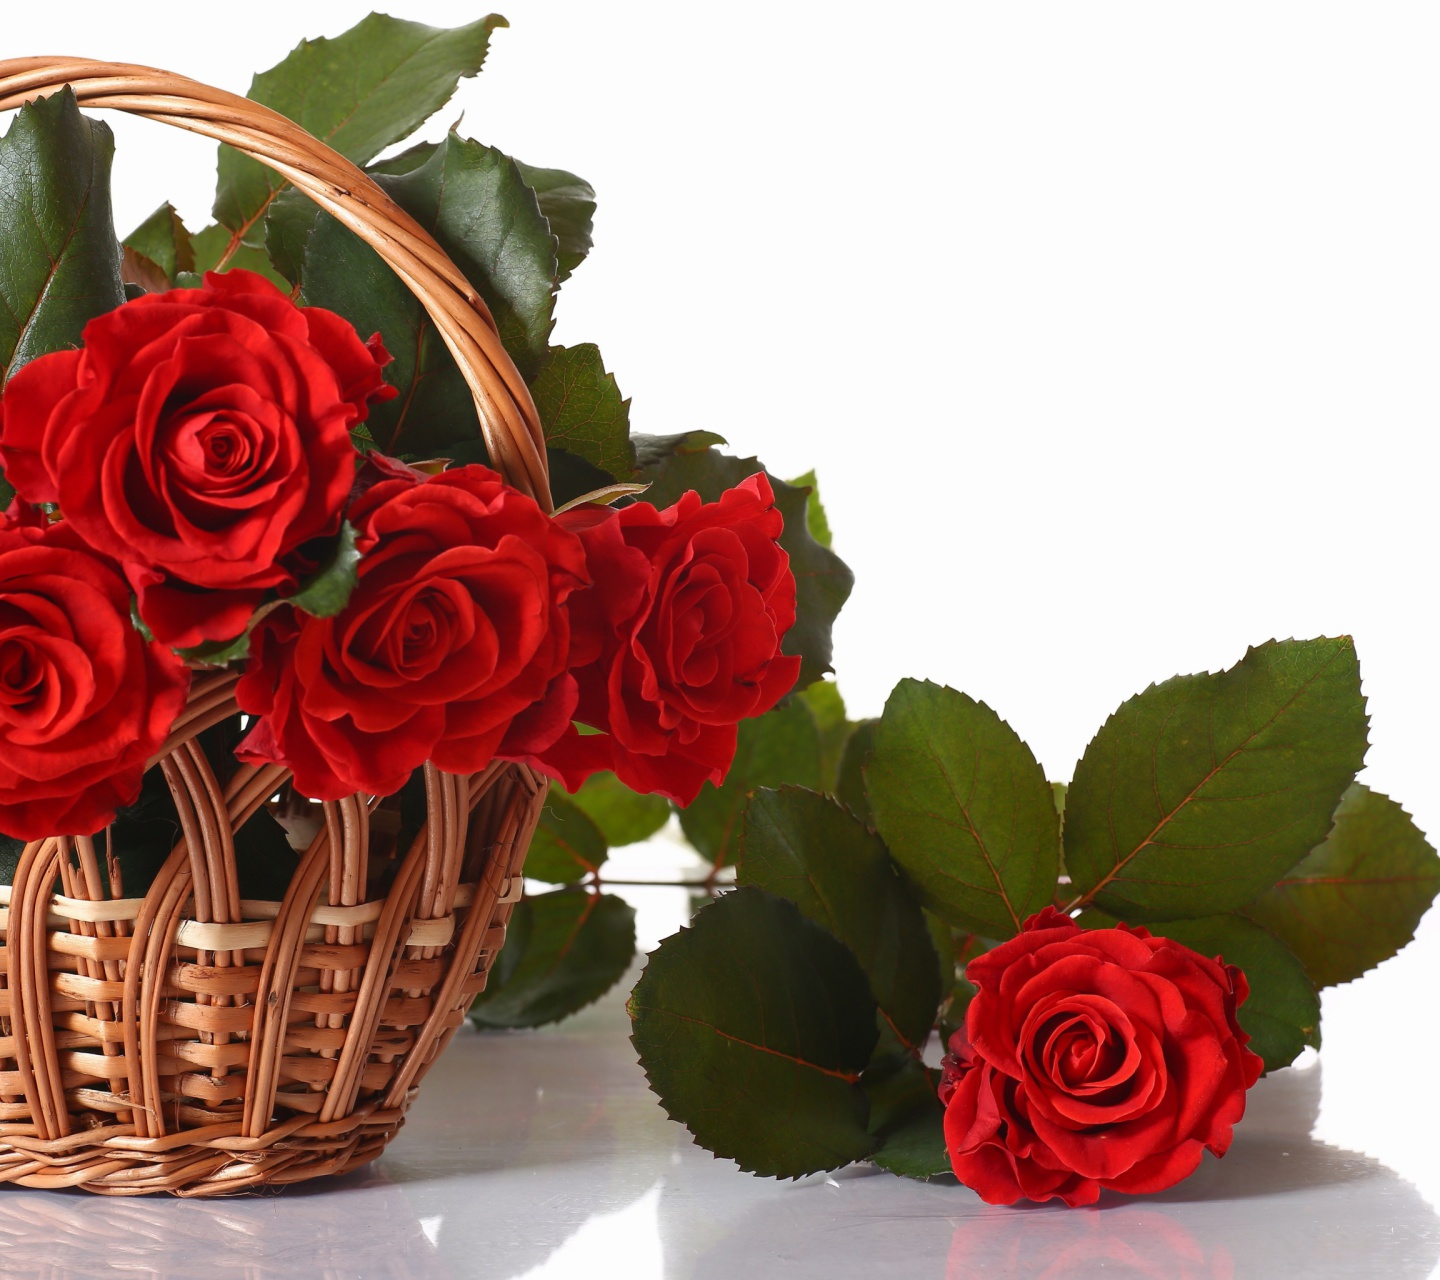 Das Basket with Roses Wallpaper 1440x1280